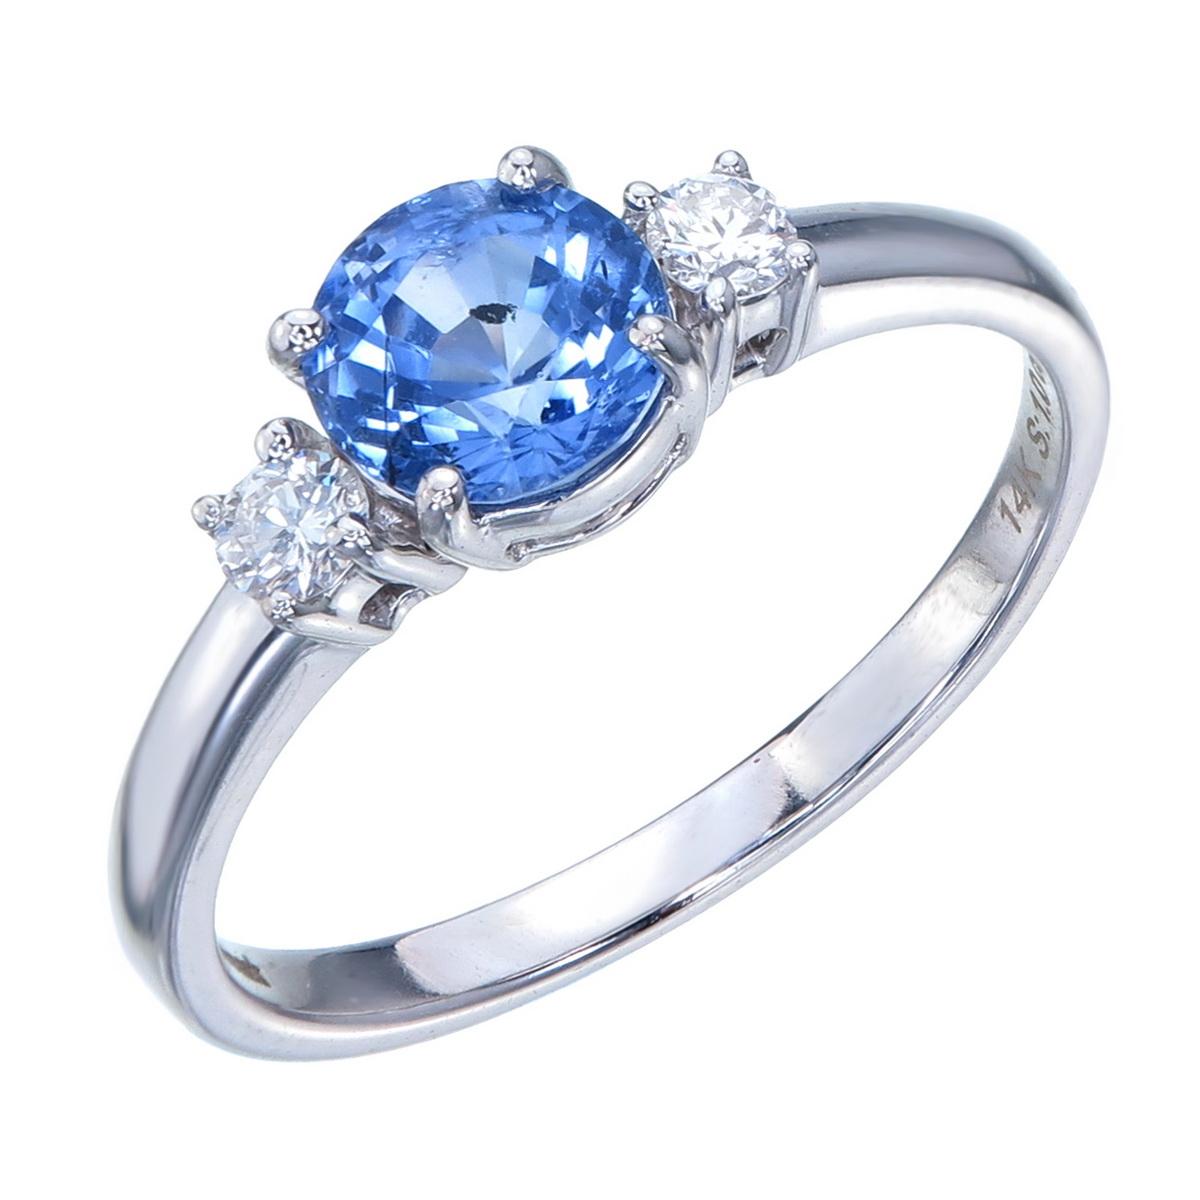 Pastel Blue Madagascar Sapphire Diamond Ring set in 14 Karat White Gold.
This pastel blue sapphire comes from the island country of Madagascar, one of the most abundant gem sources in the world, and features an bright, radiant brilliance and a